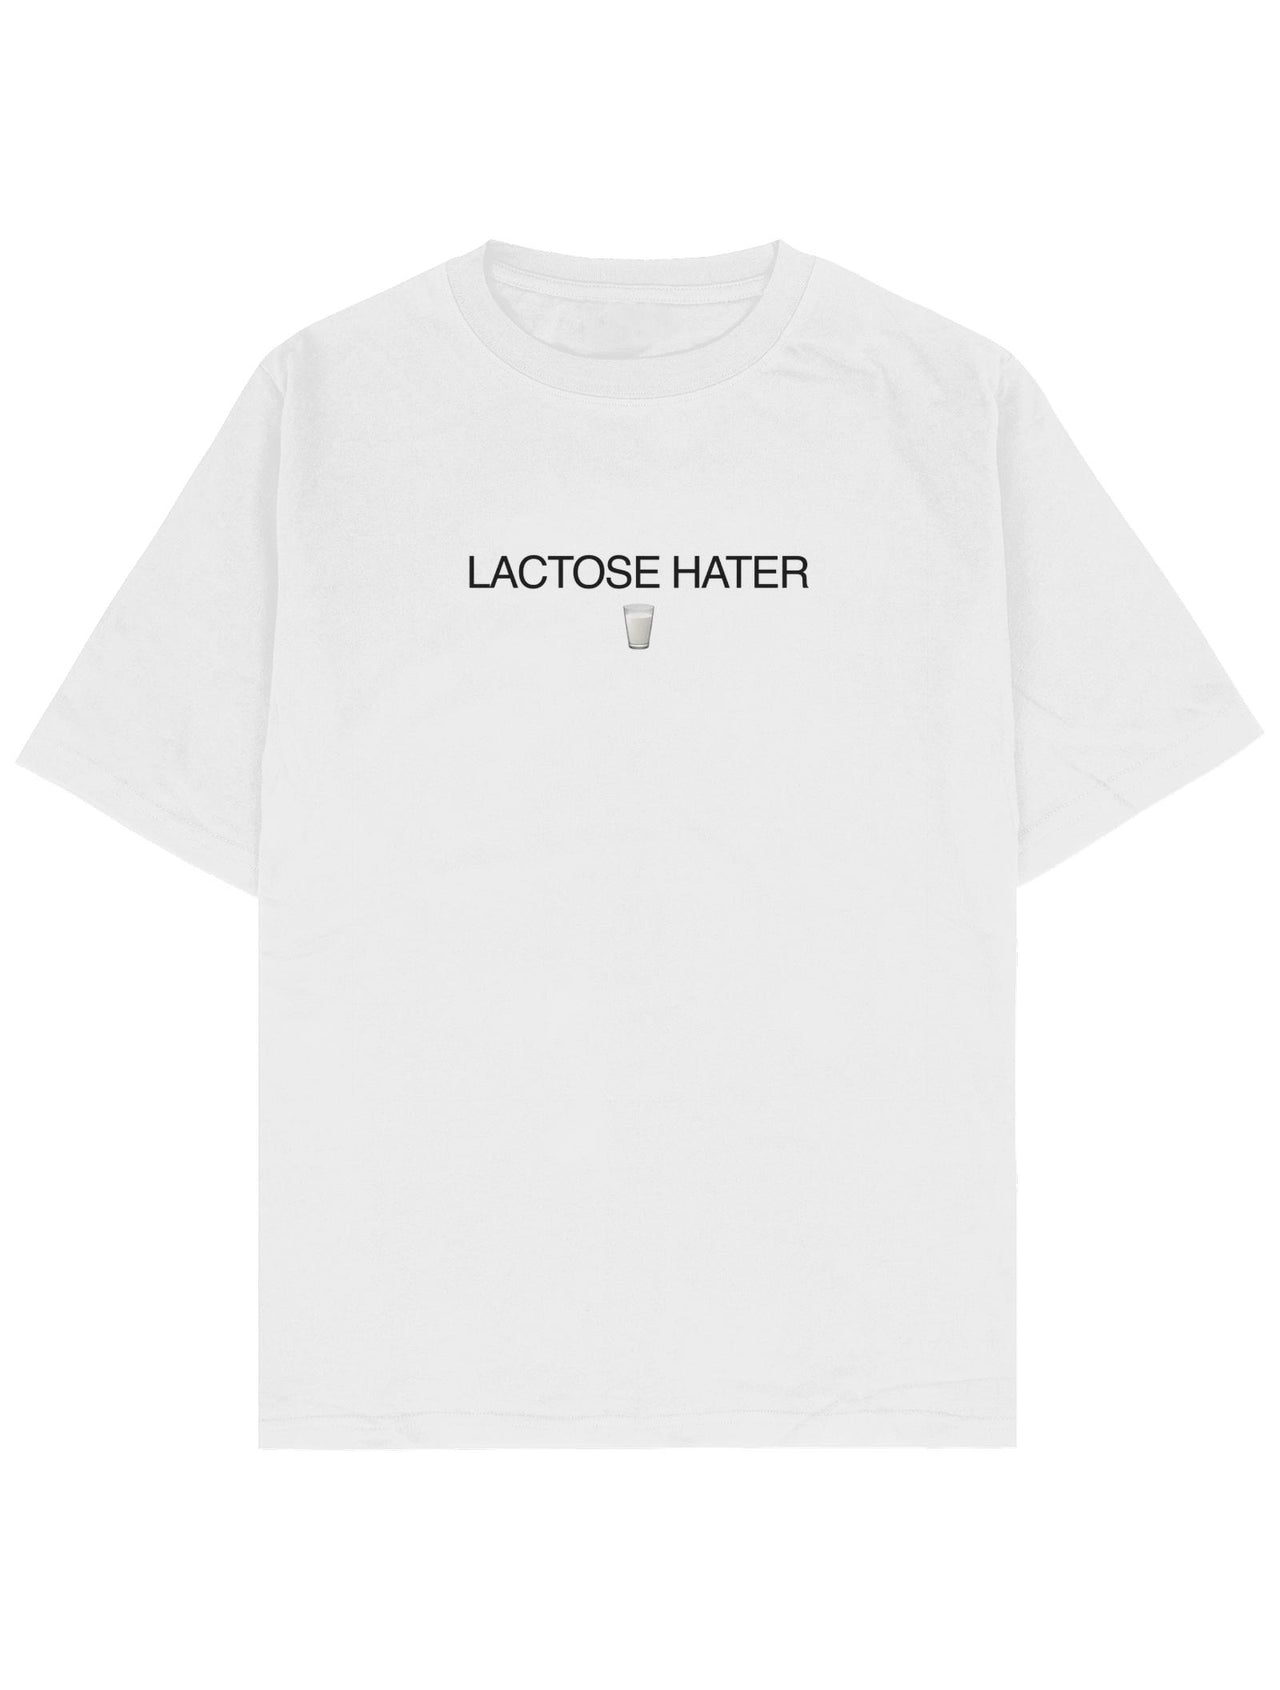 Lactose Hater Oversize Tee